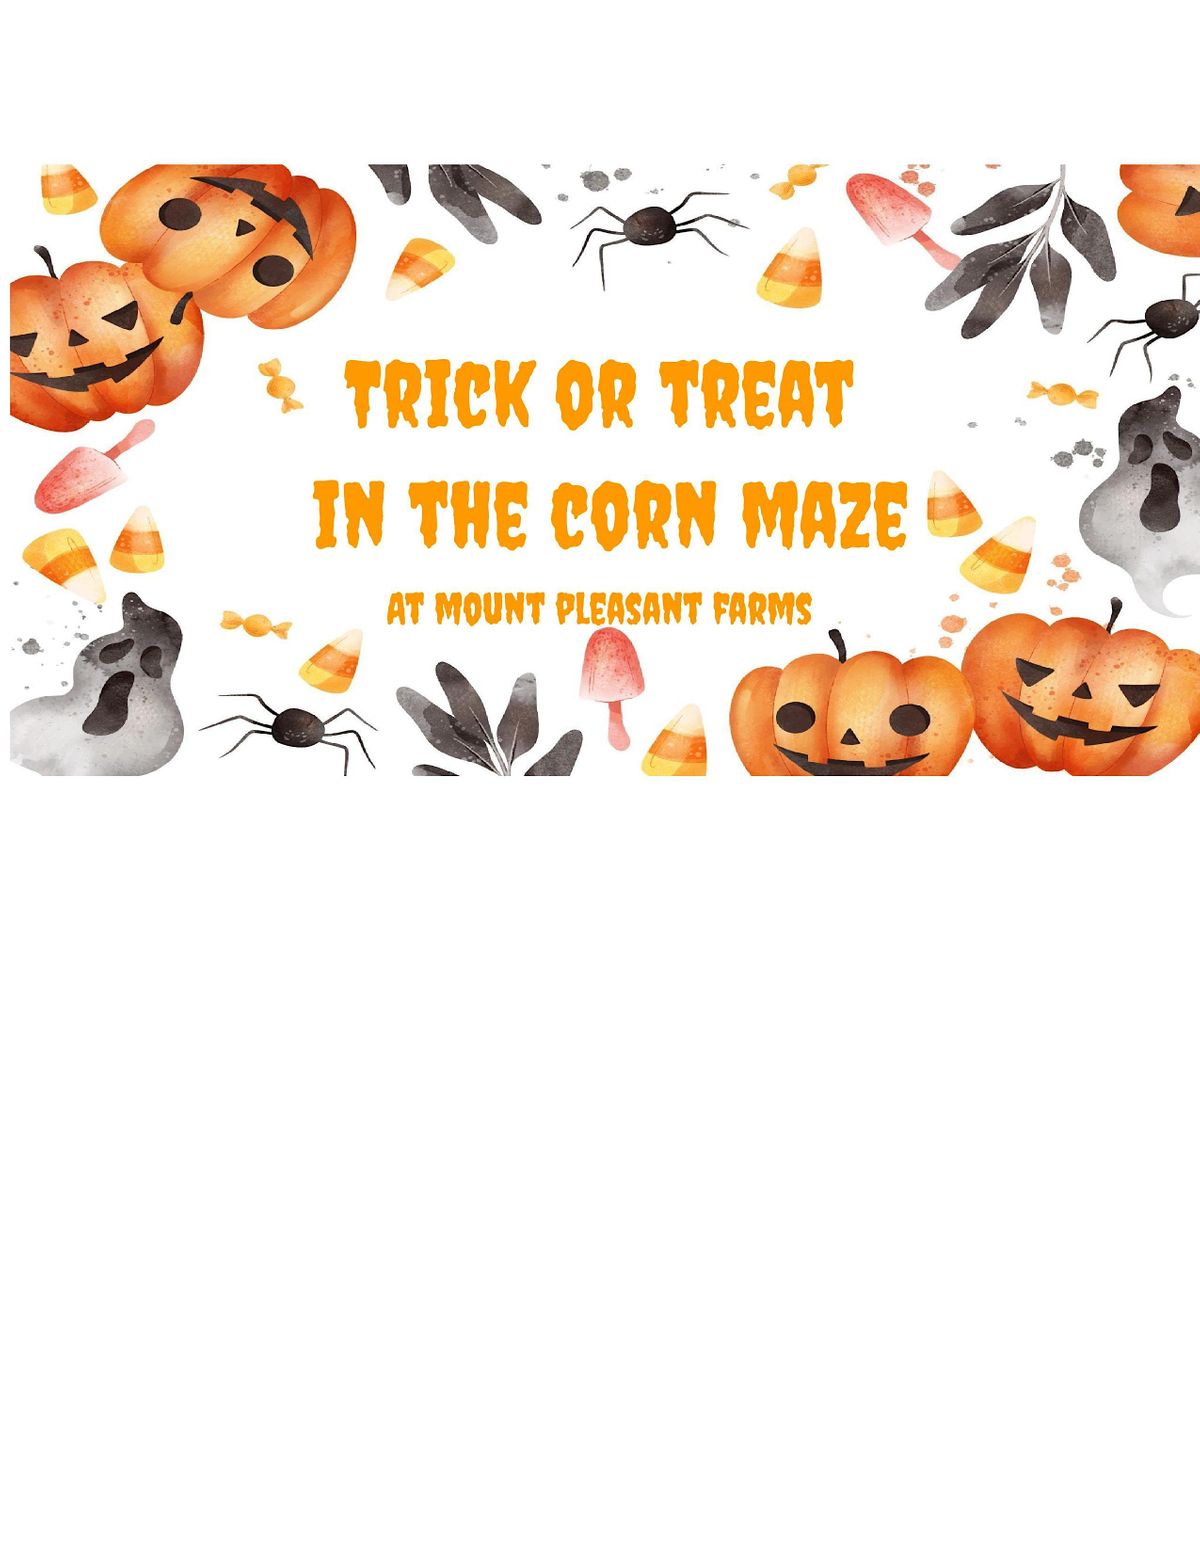 Mount Pleasant Farms Trick or Treating in the Corn Maze!, Mount